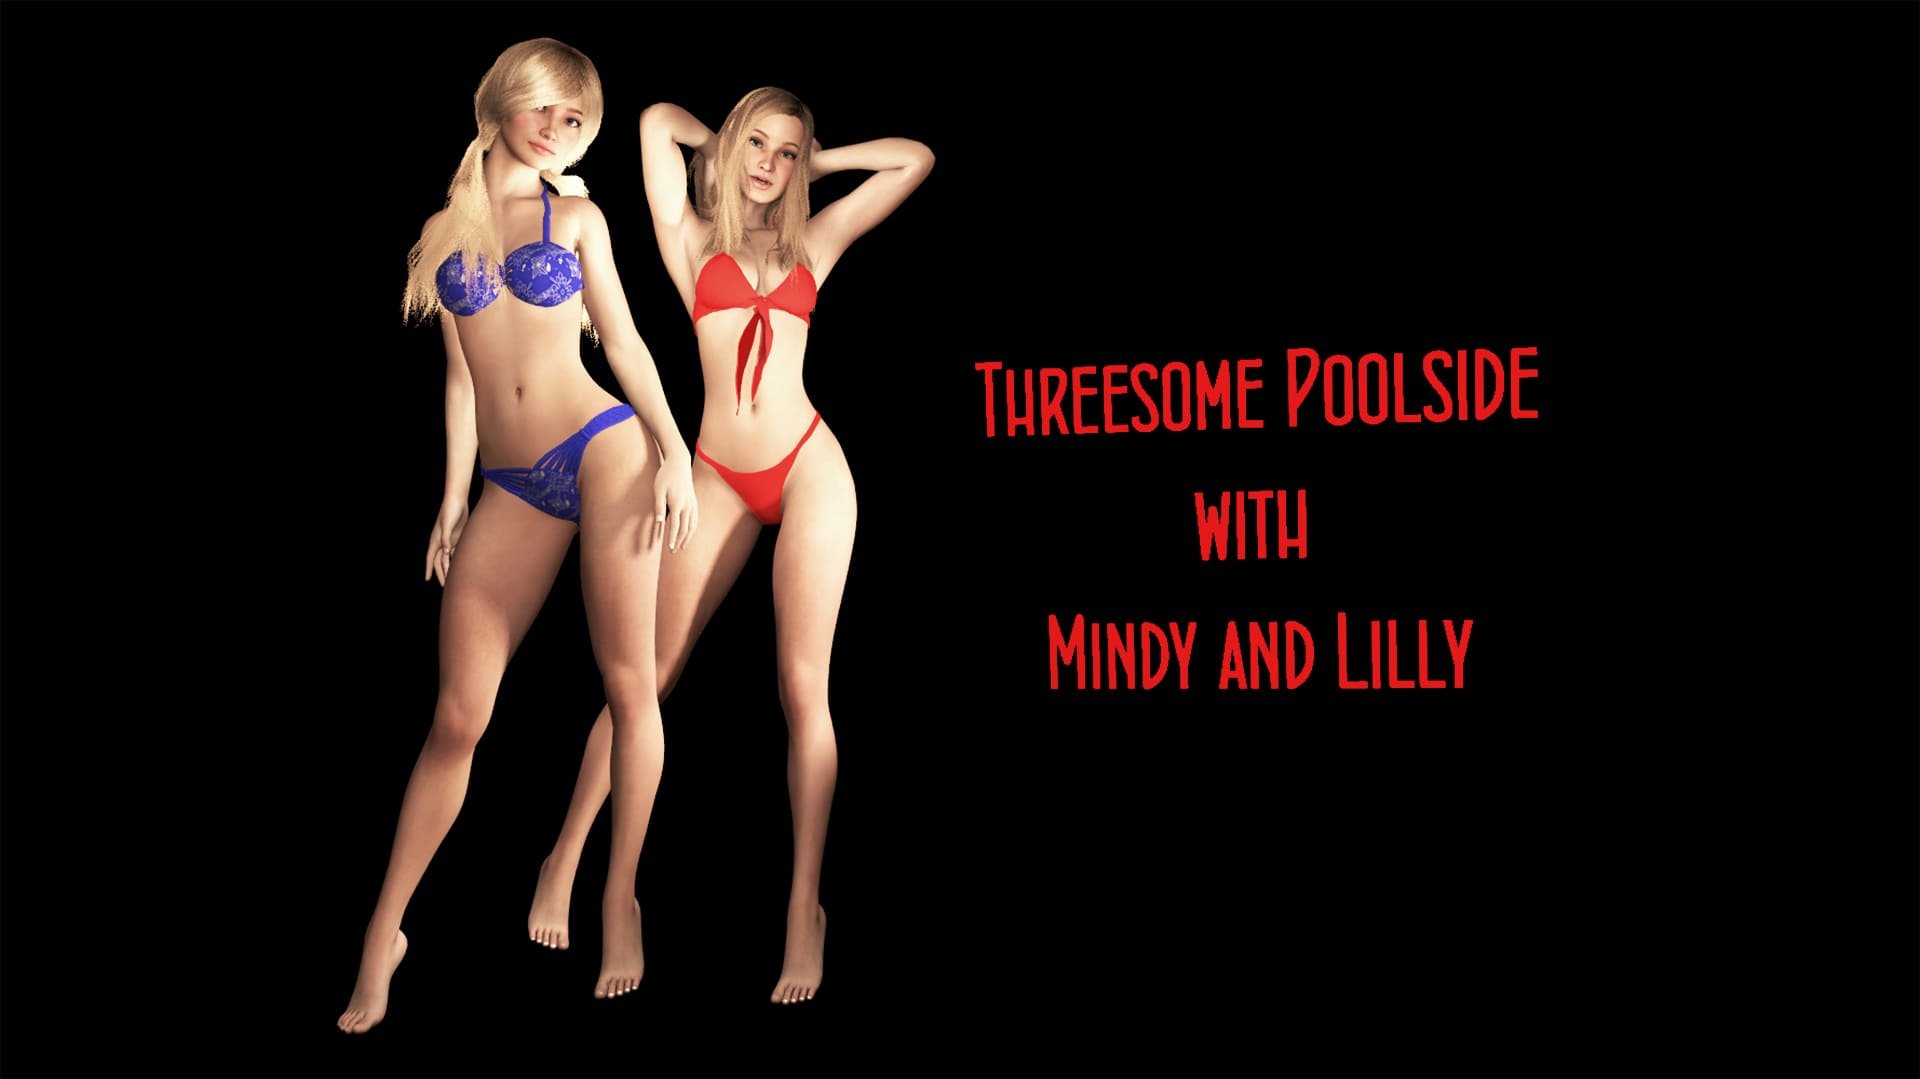 Threesome Poolside – Mindy and Lilly